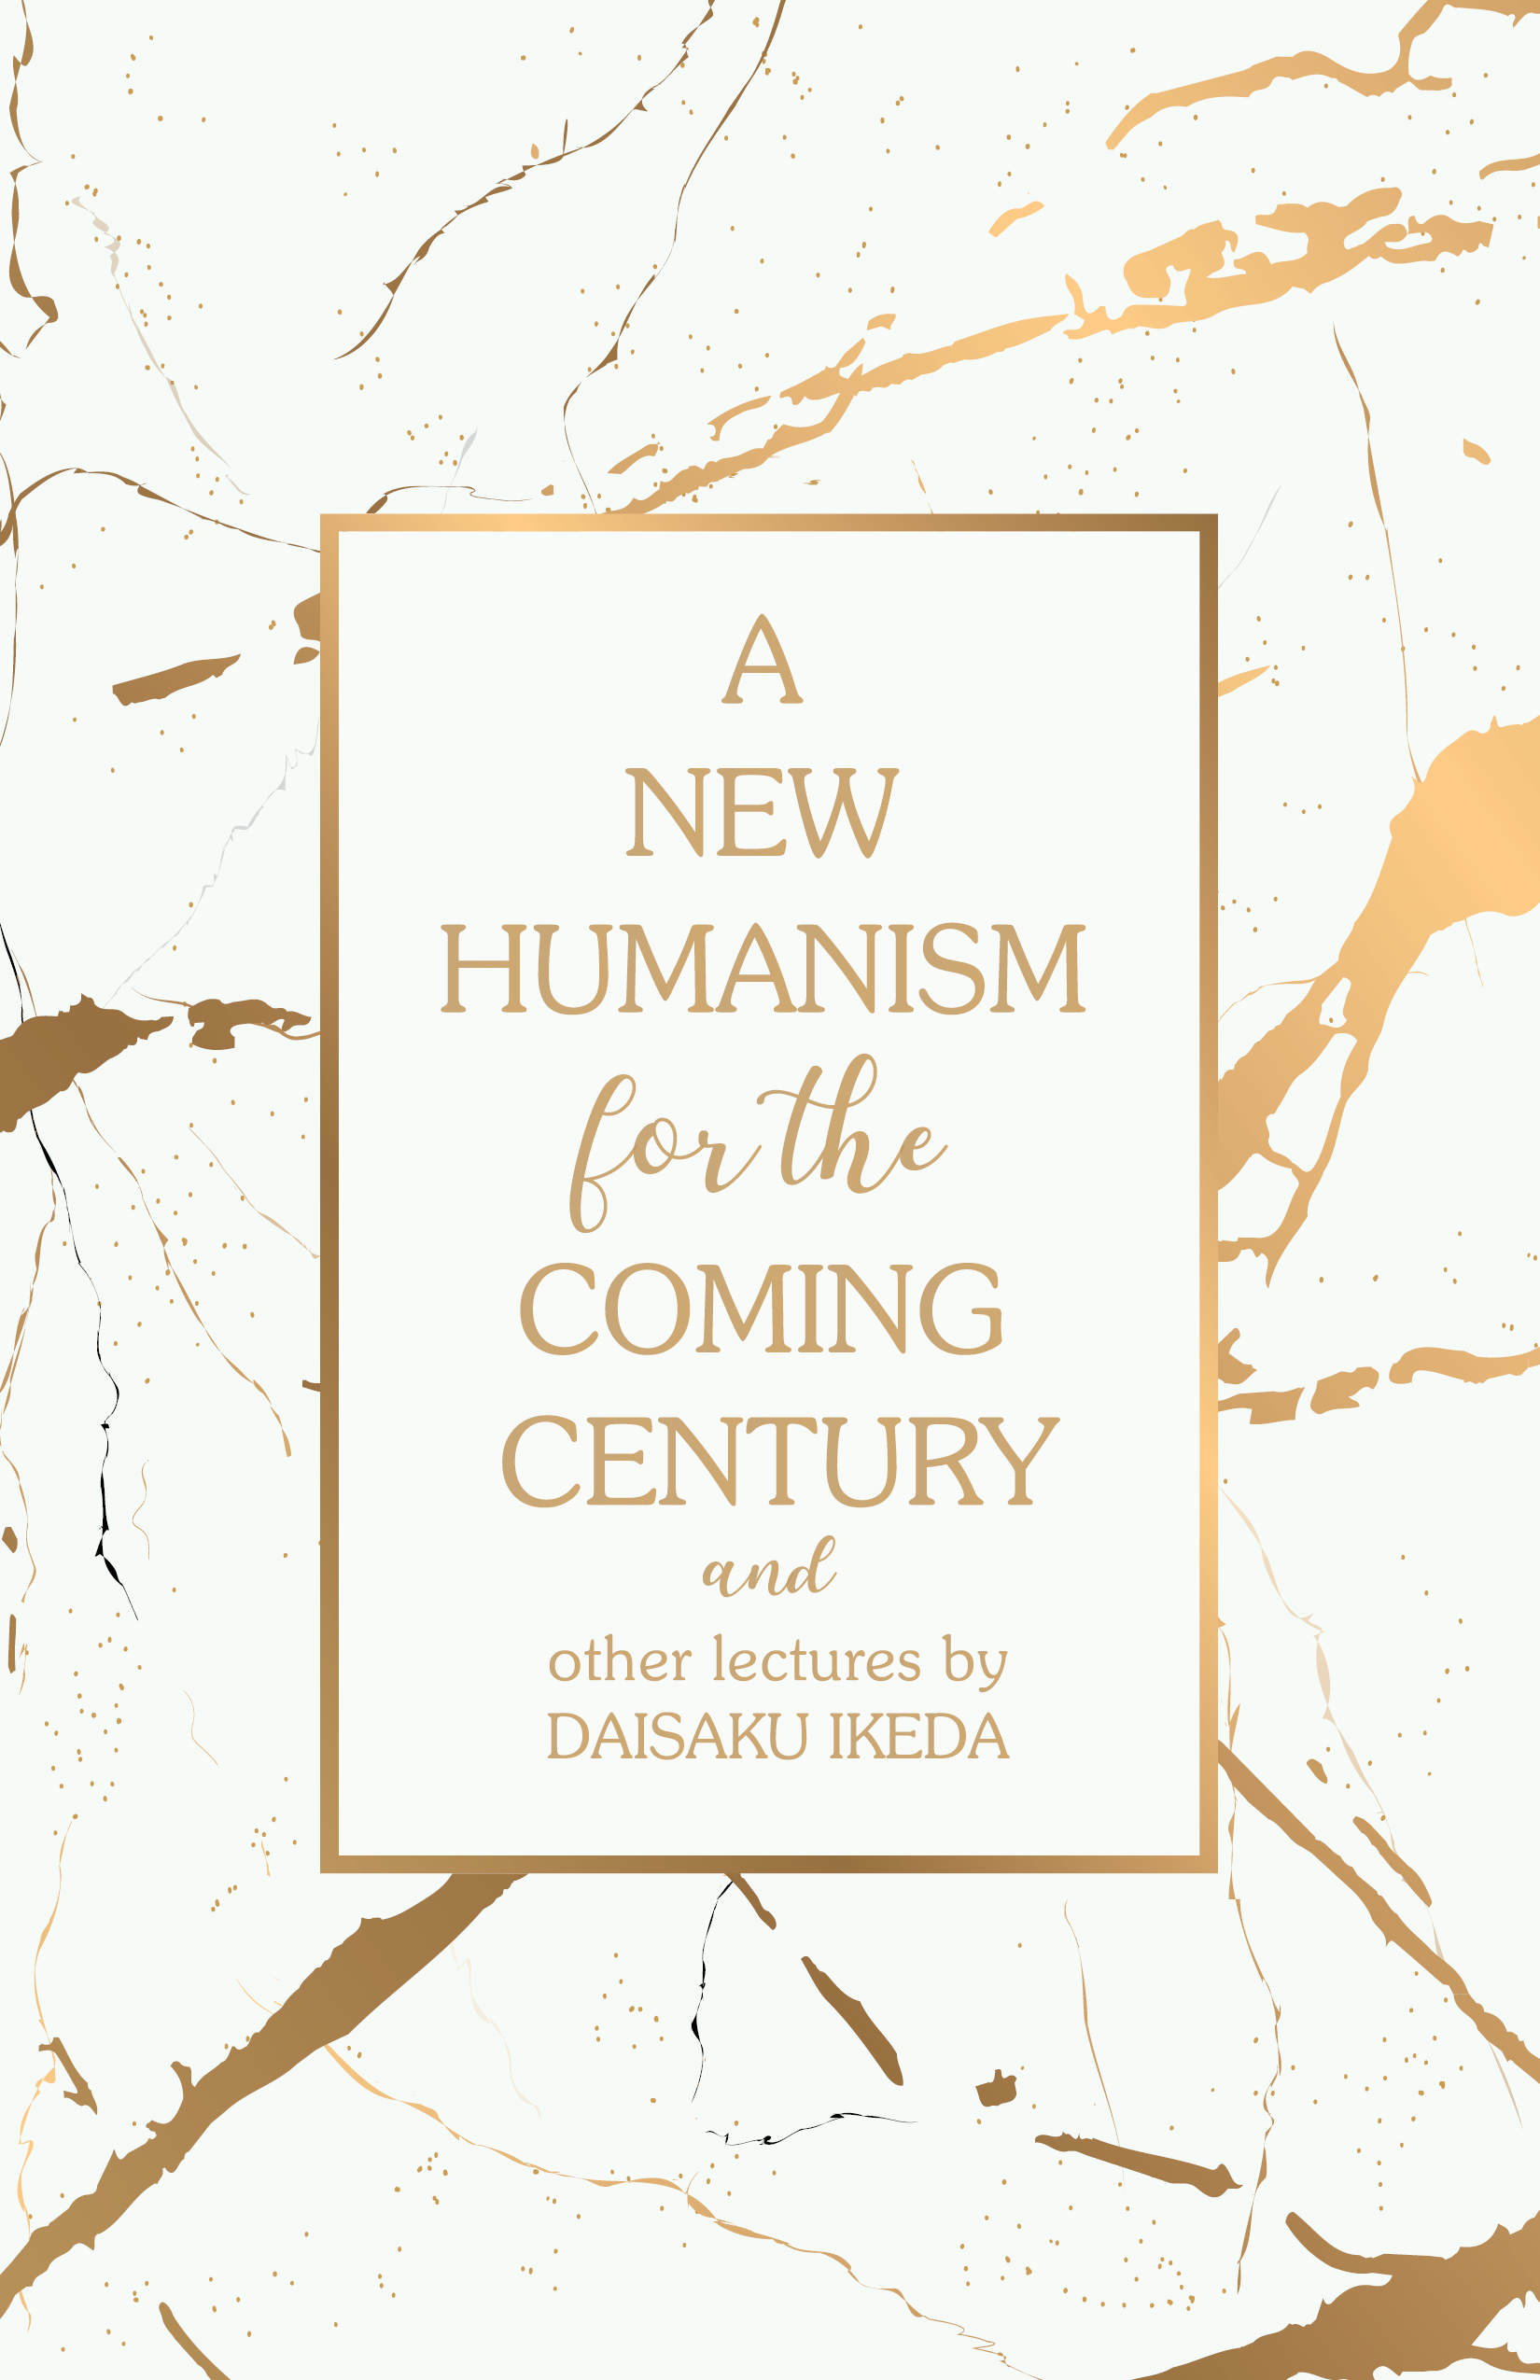 A New Humanism for the Coming Century